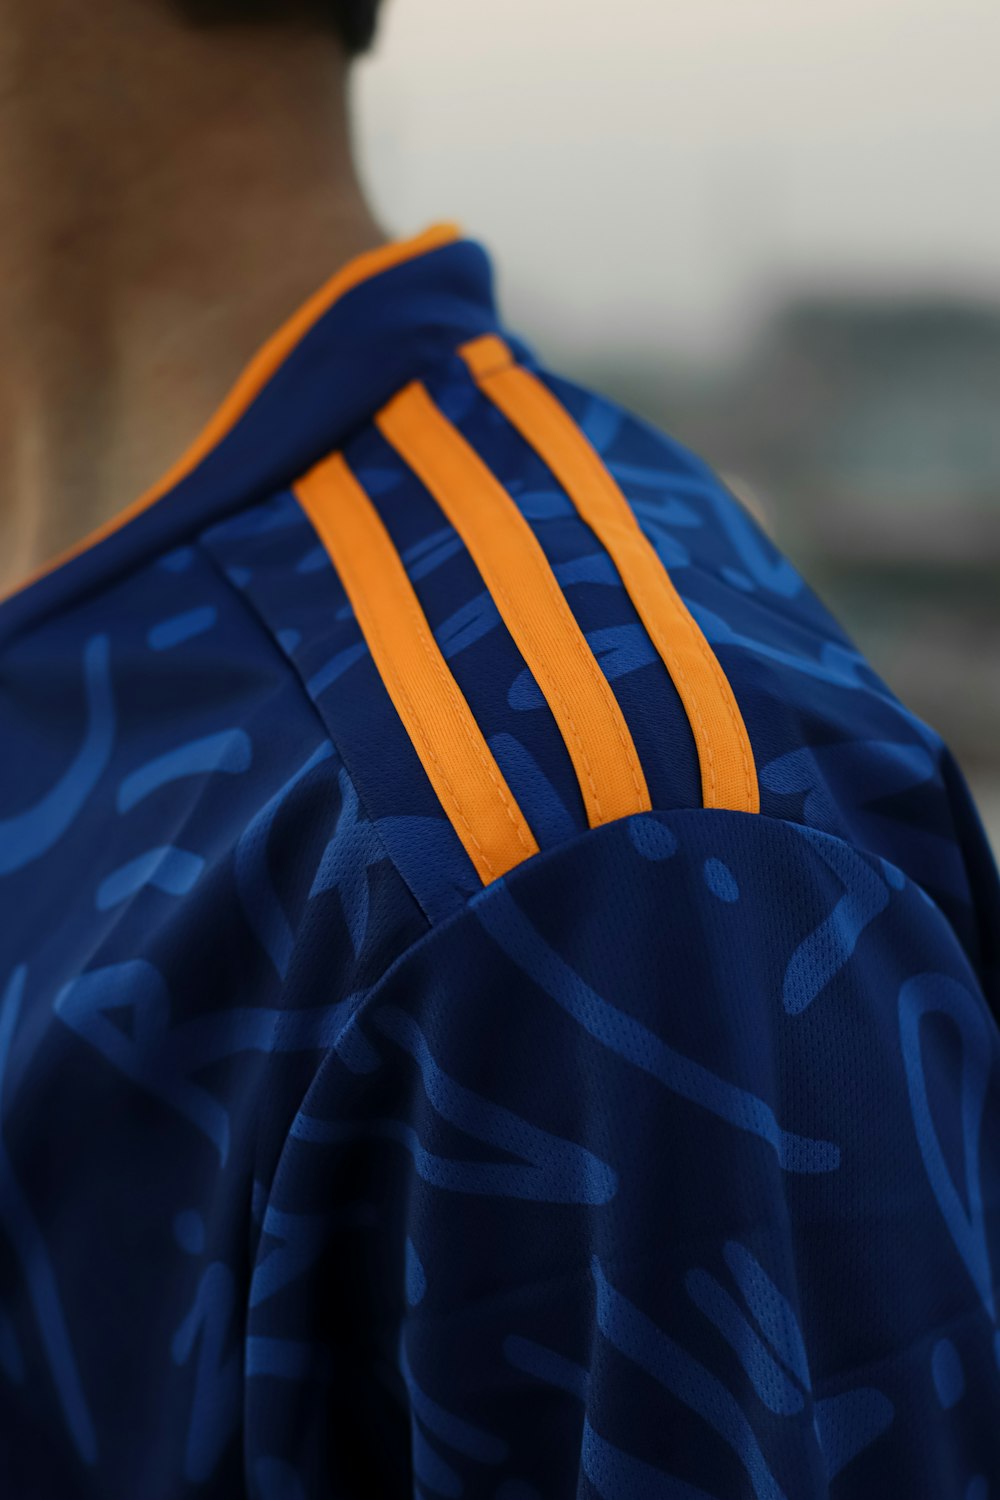 a close up of a person wearing a blue and orange uniform